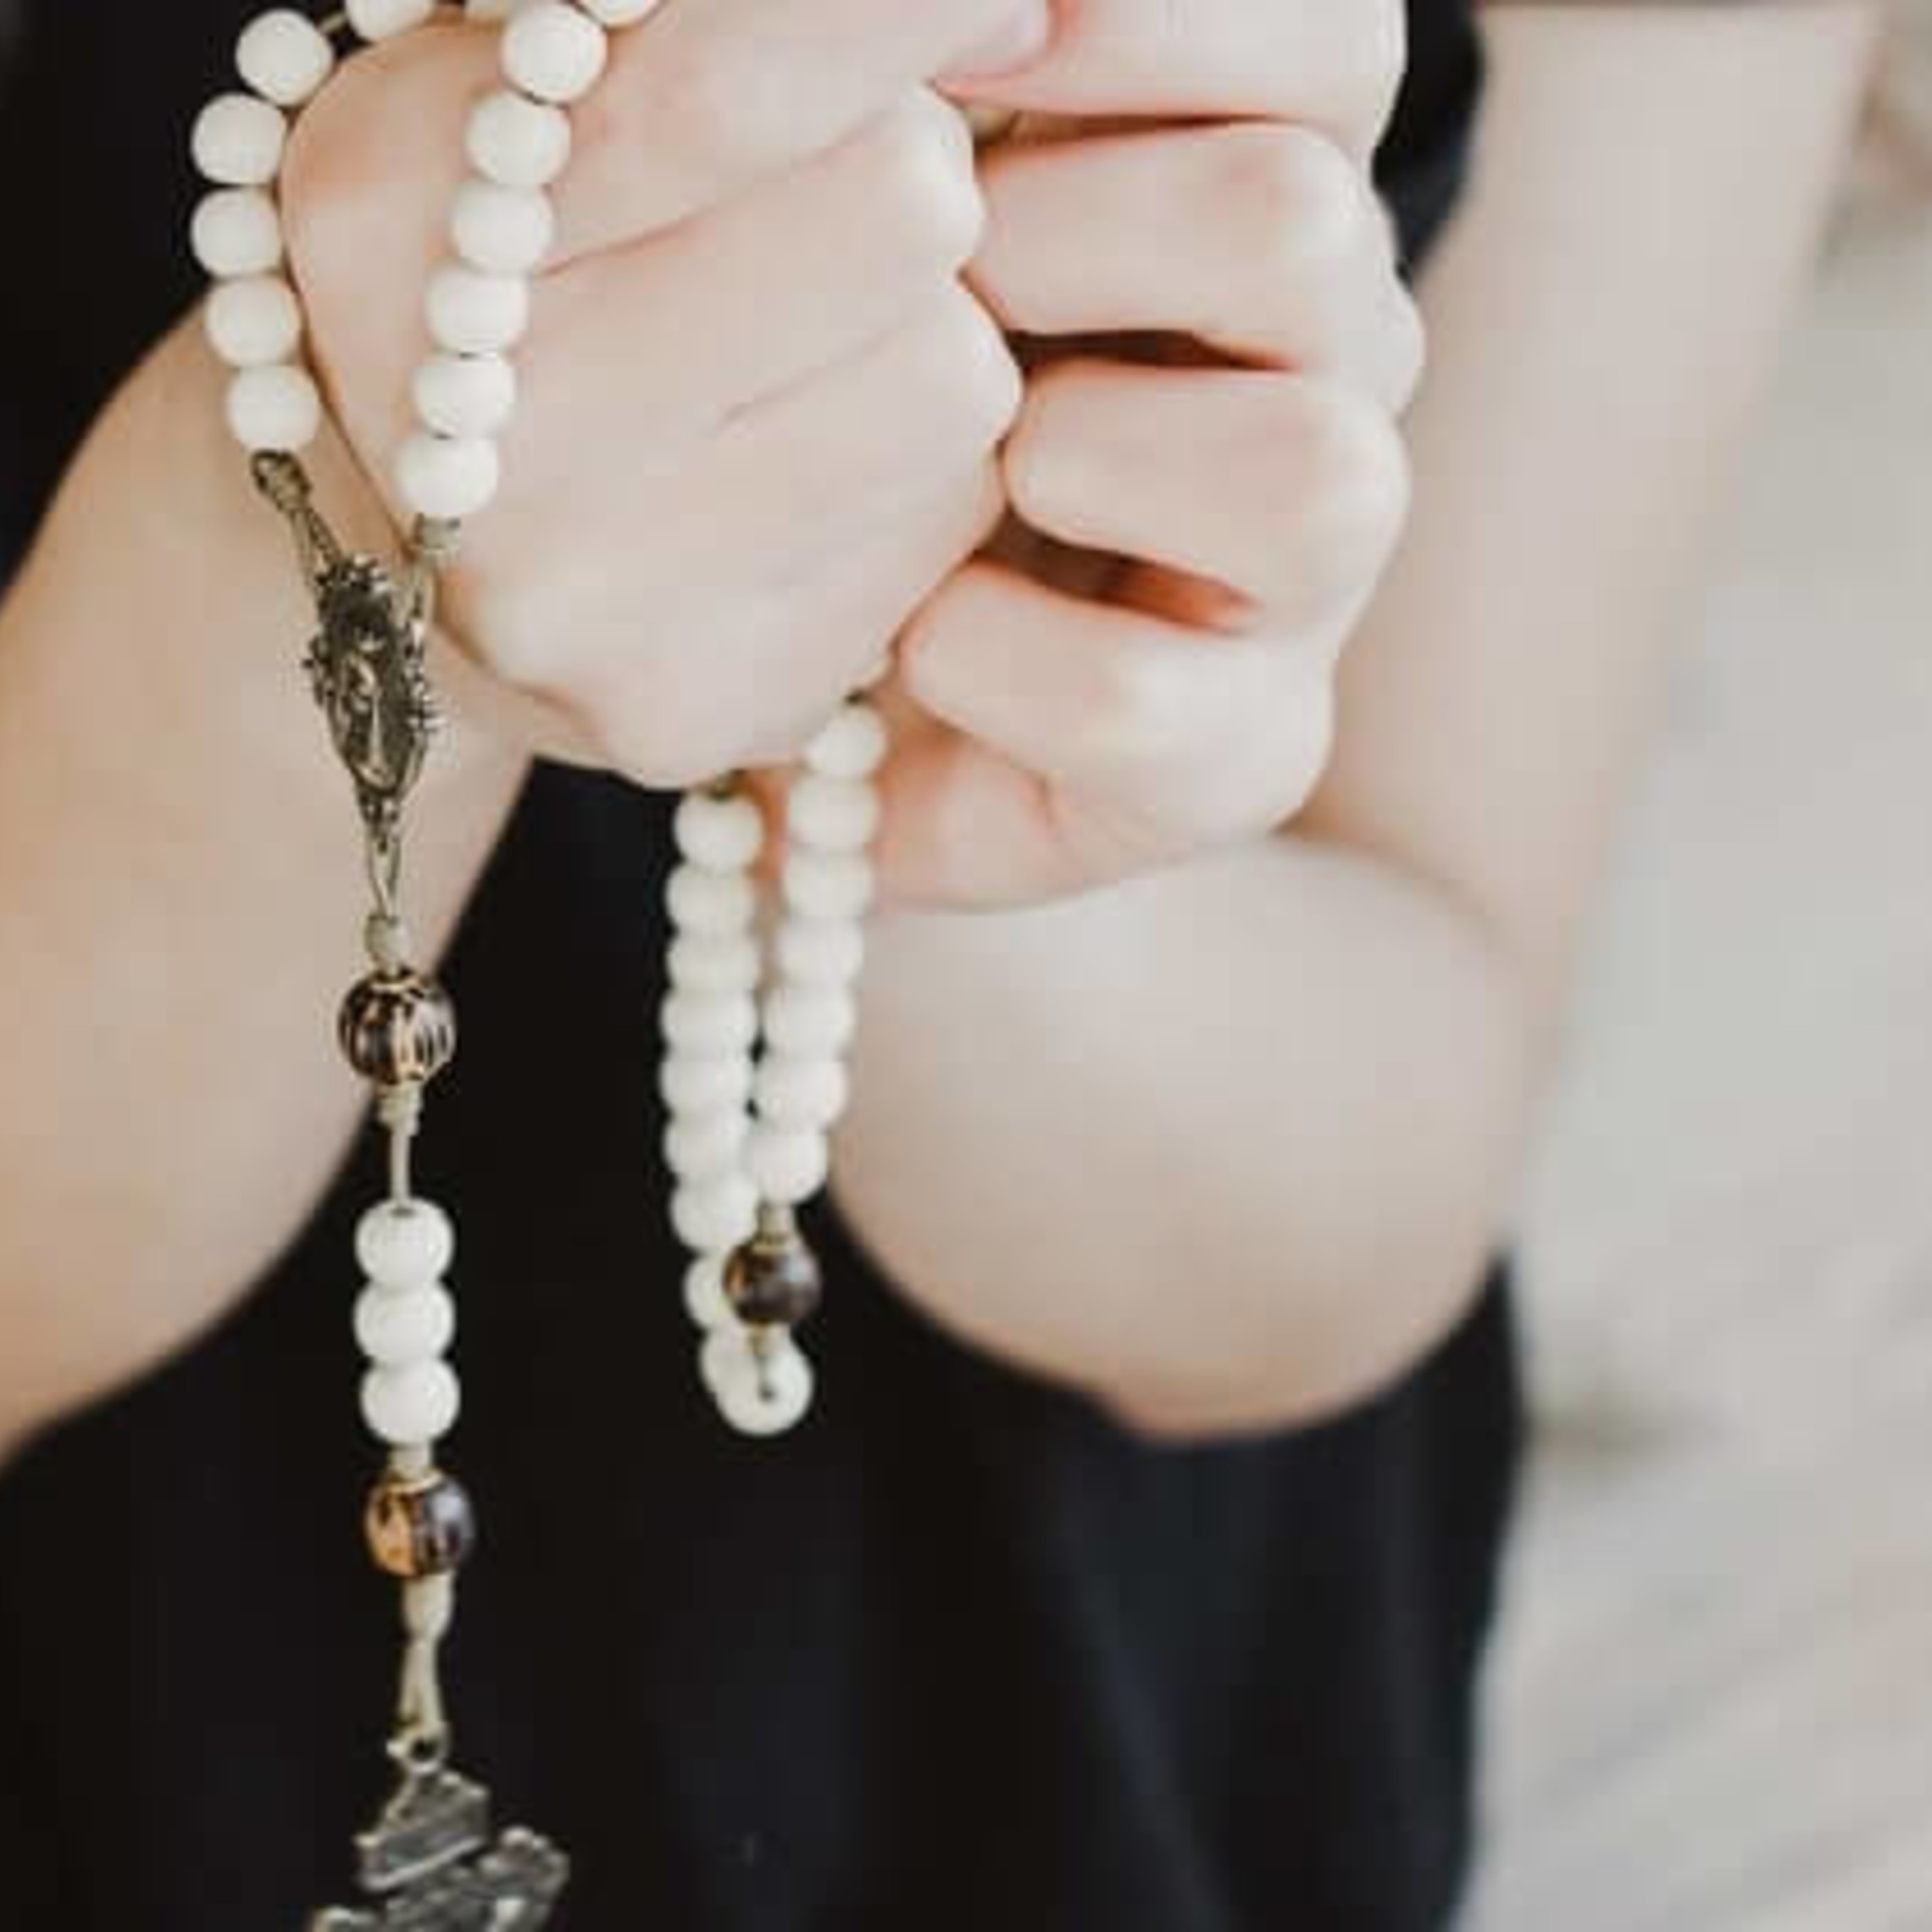 How to Pray the Rosary Deeply: 5 Strategies That Really Help